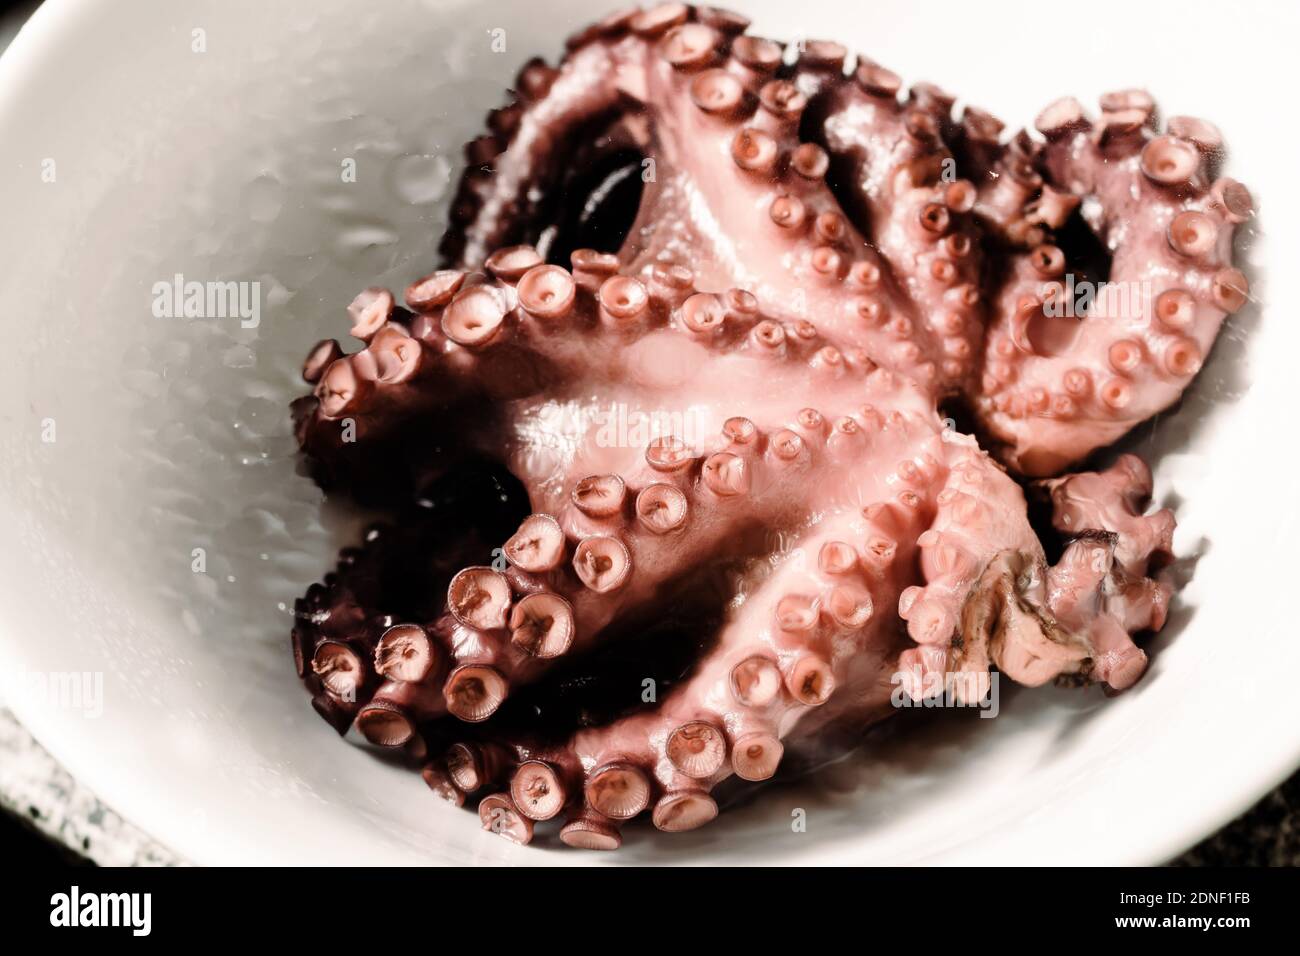 Fresh Cooked Octopus Tentacle Close Up Stock Photo - Image of